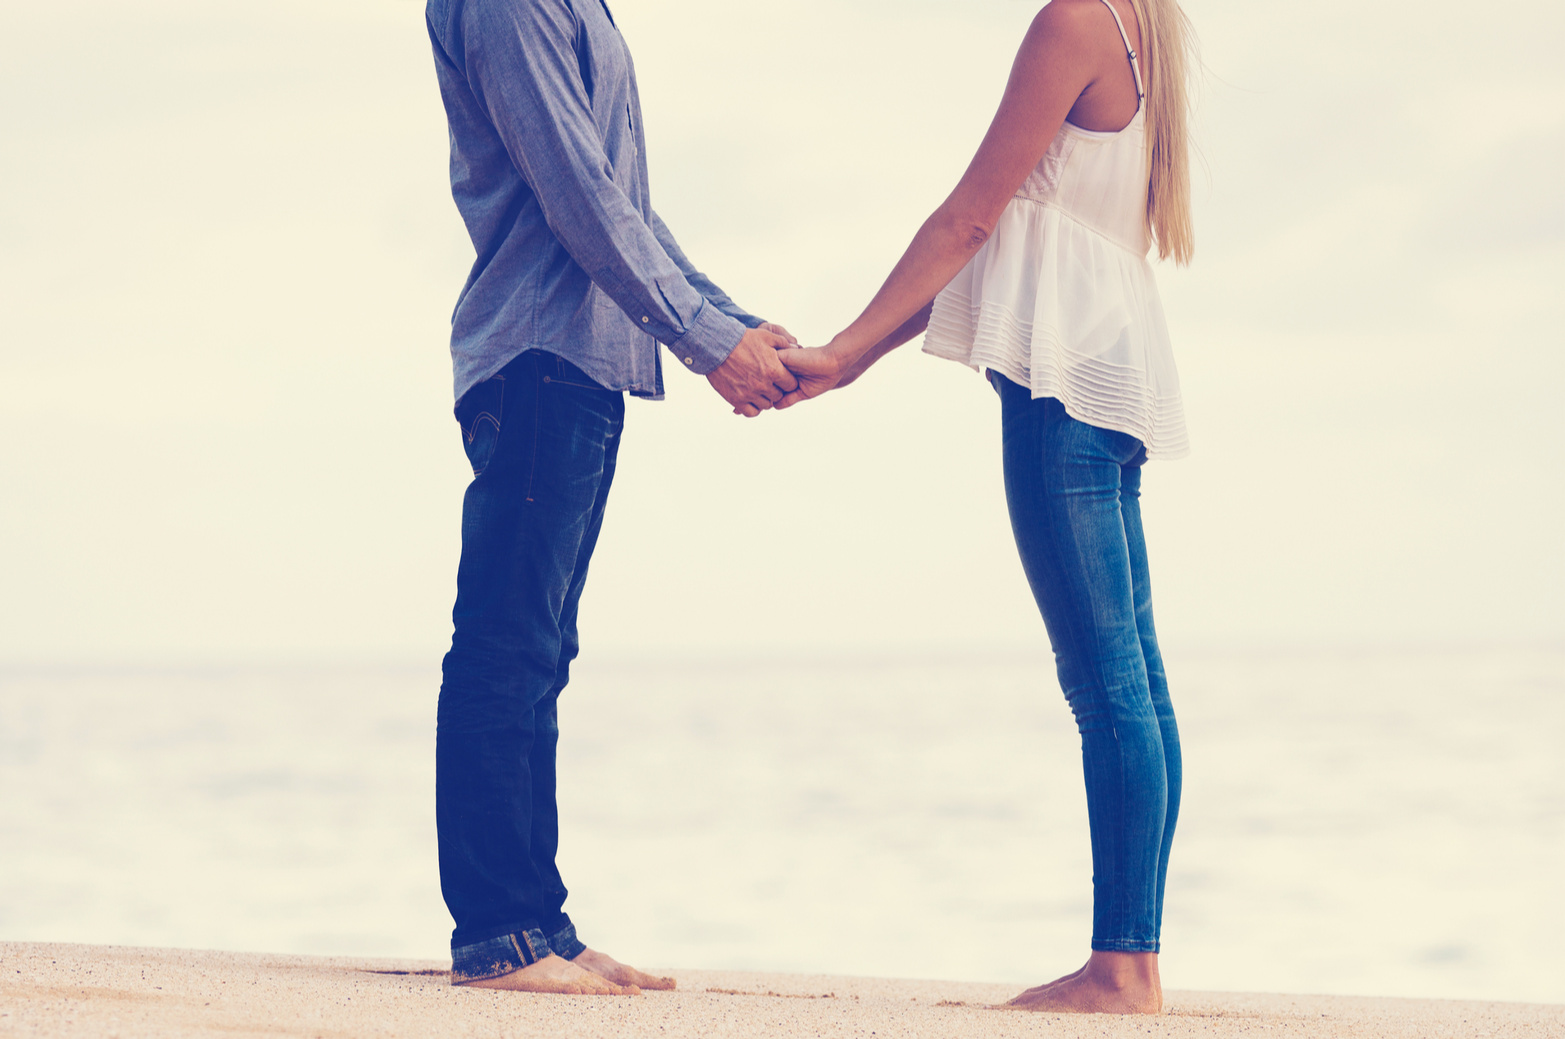 7 Ways to Bring Intimacy Back into Marriage